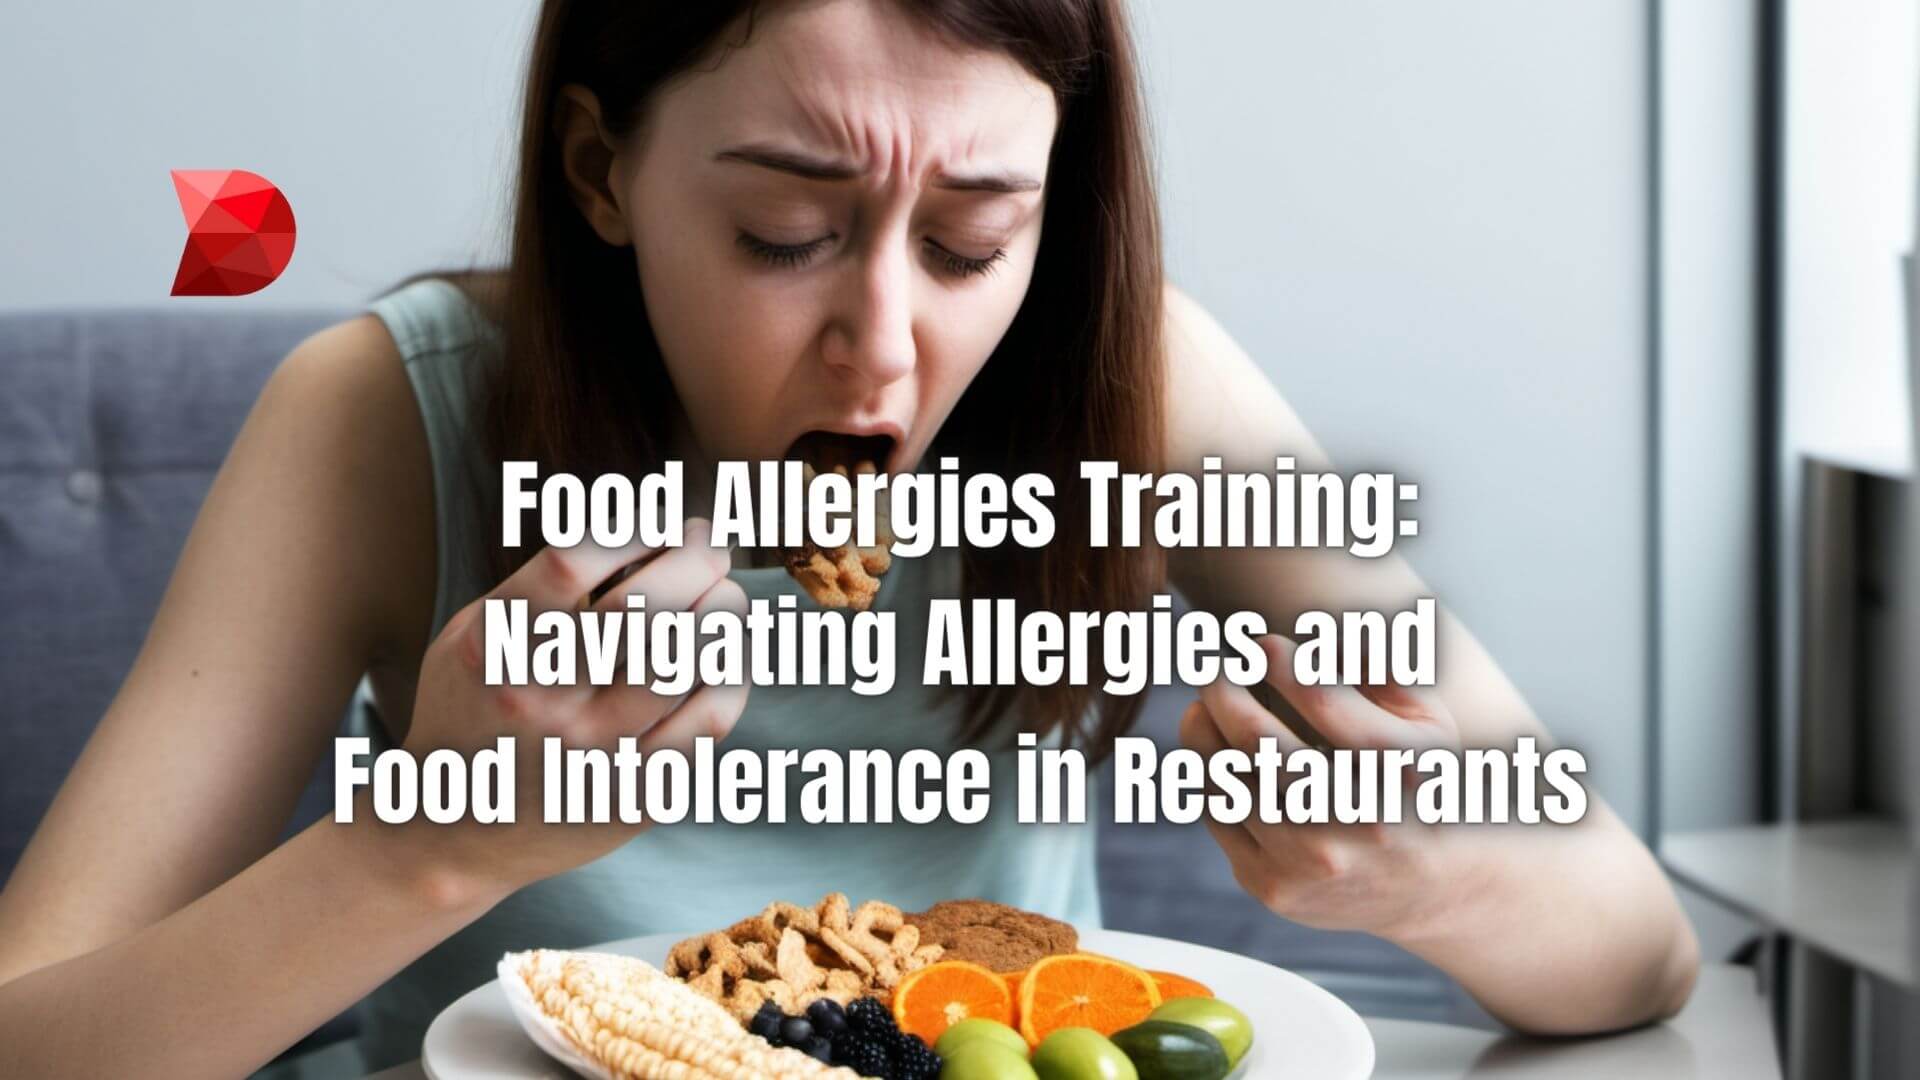 Explore this essential training guide for handling food allergies in restaurants. Learn how to manage intolerances with expertise.